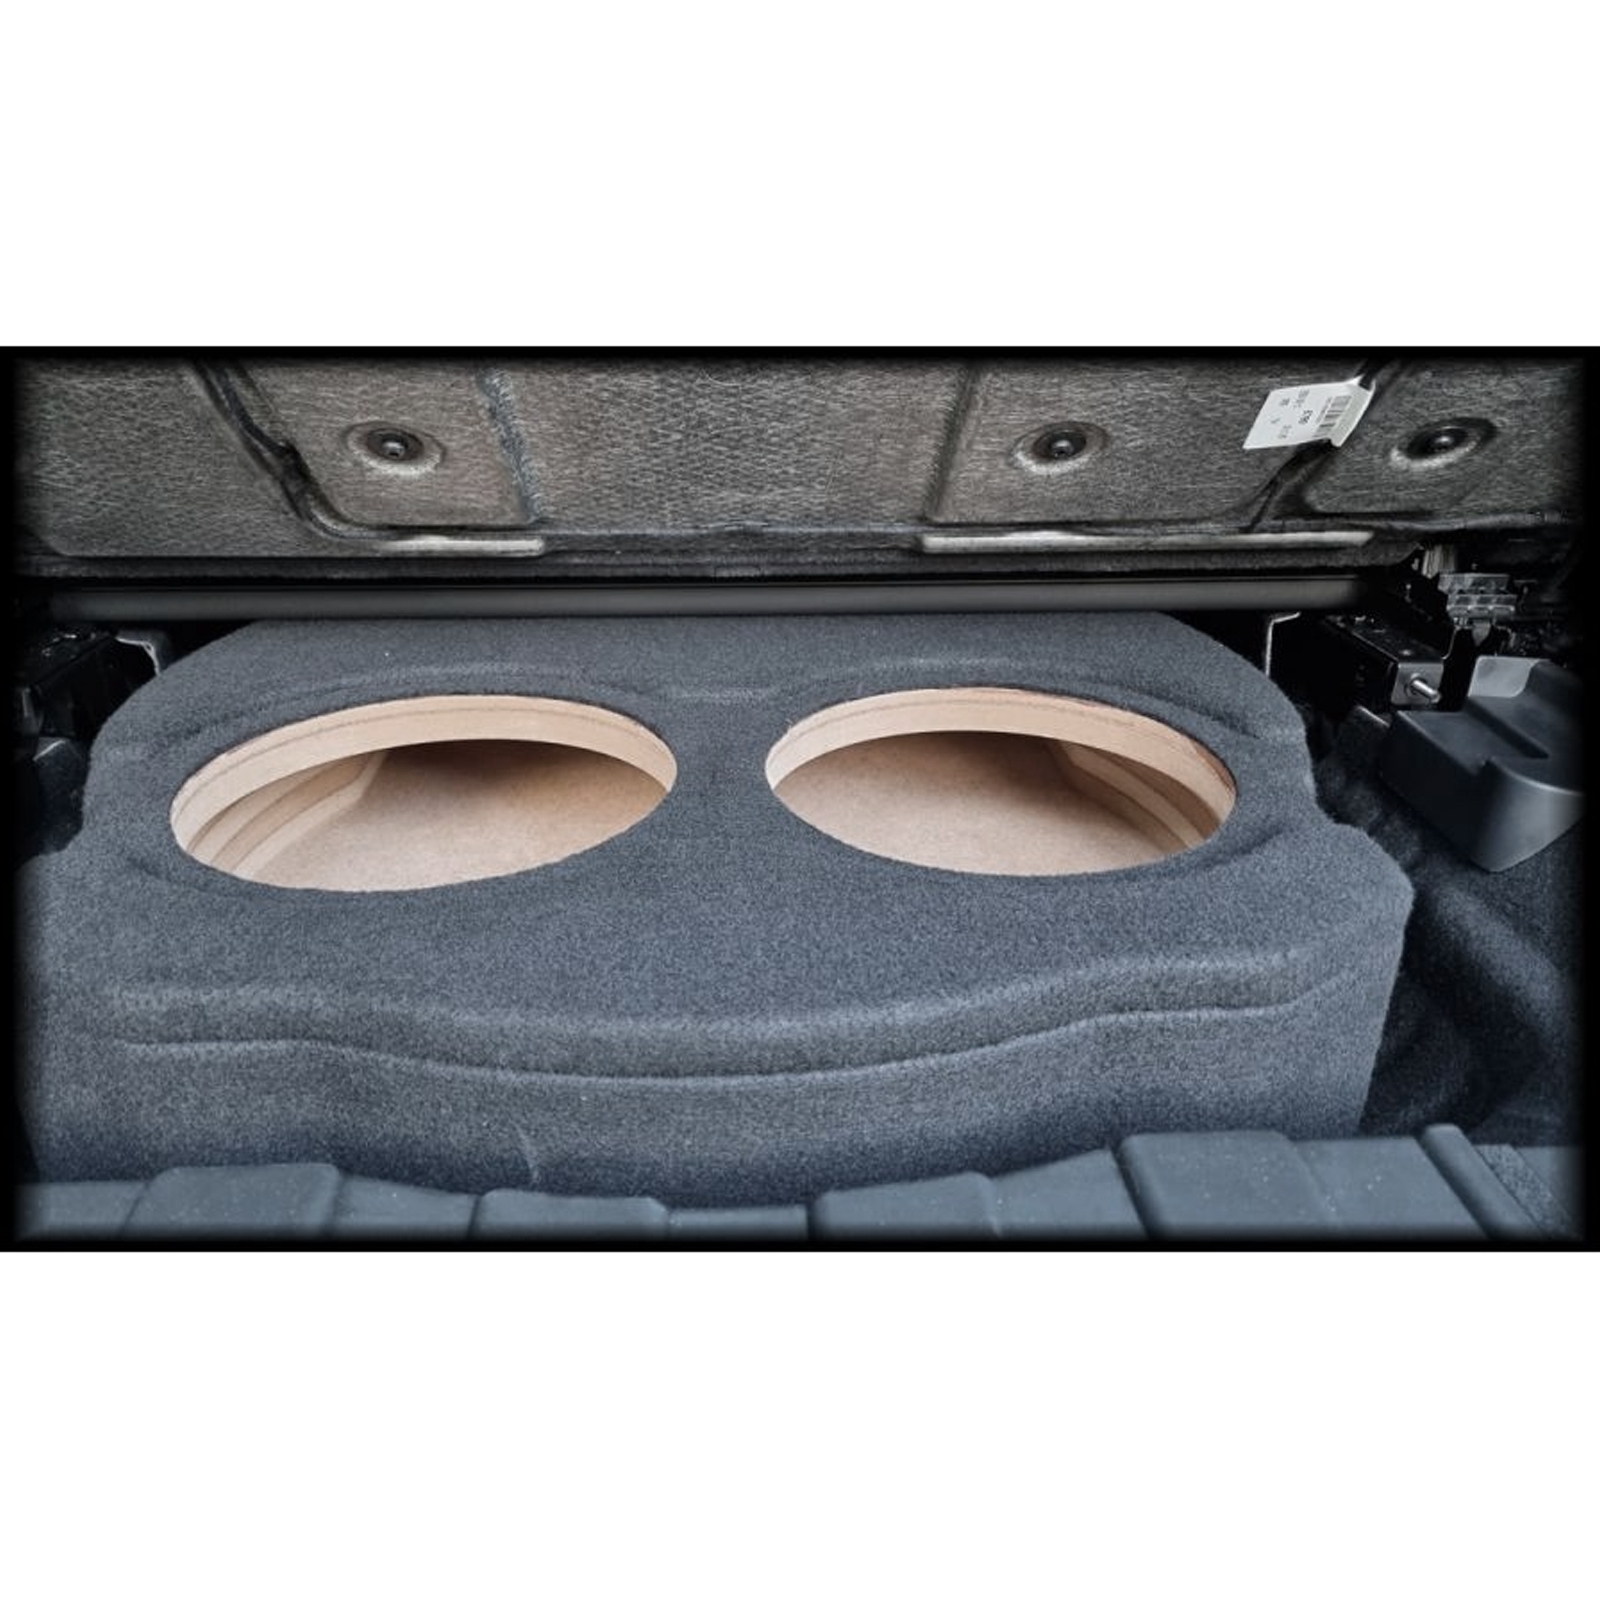 Custom Fit subwoofer enclosure bass box for BMW X5 G05 from 2018 | eBay